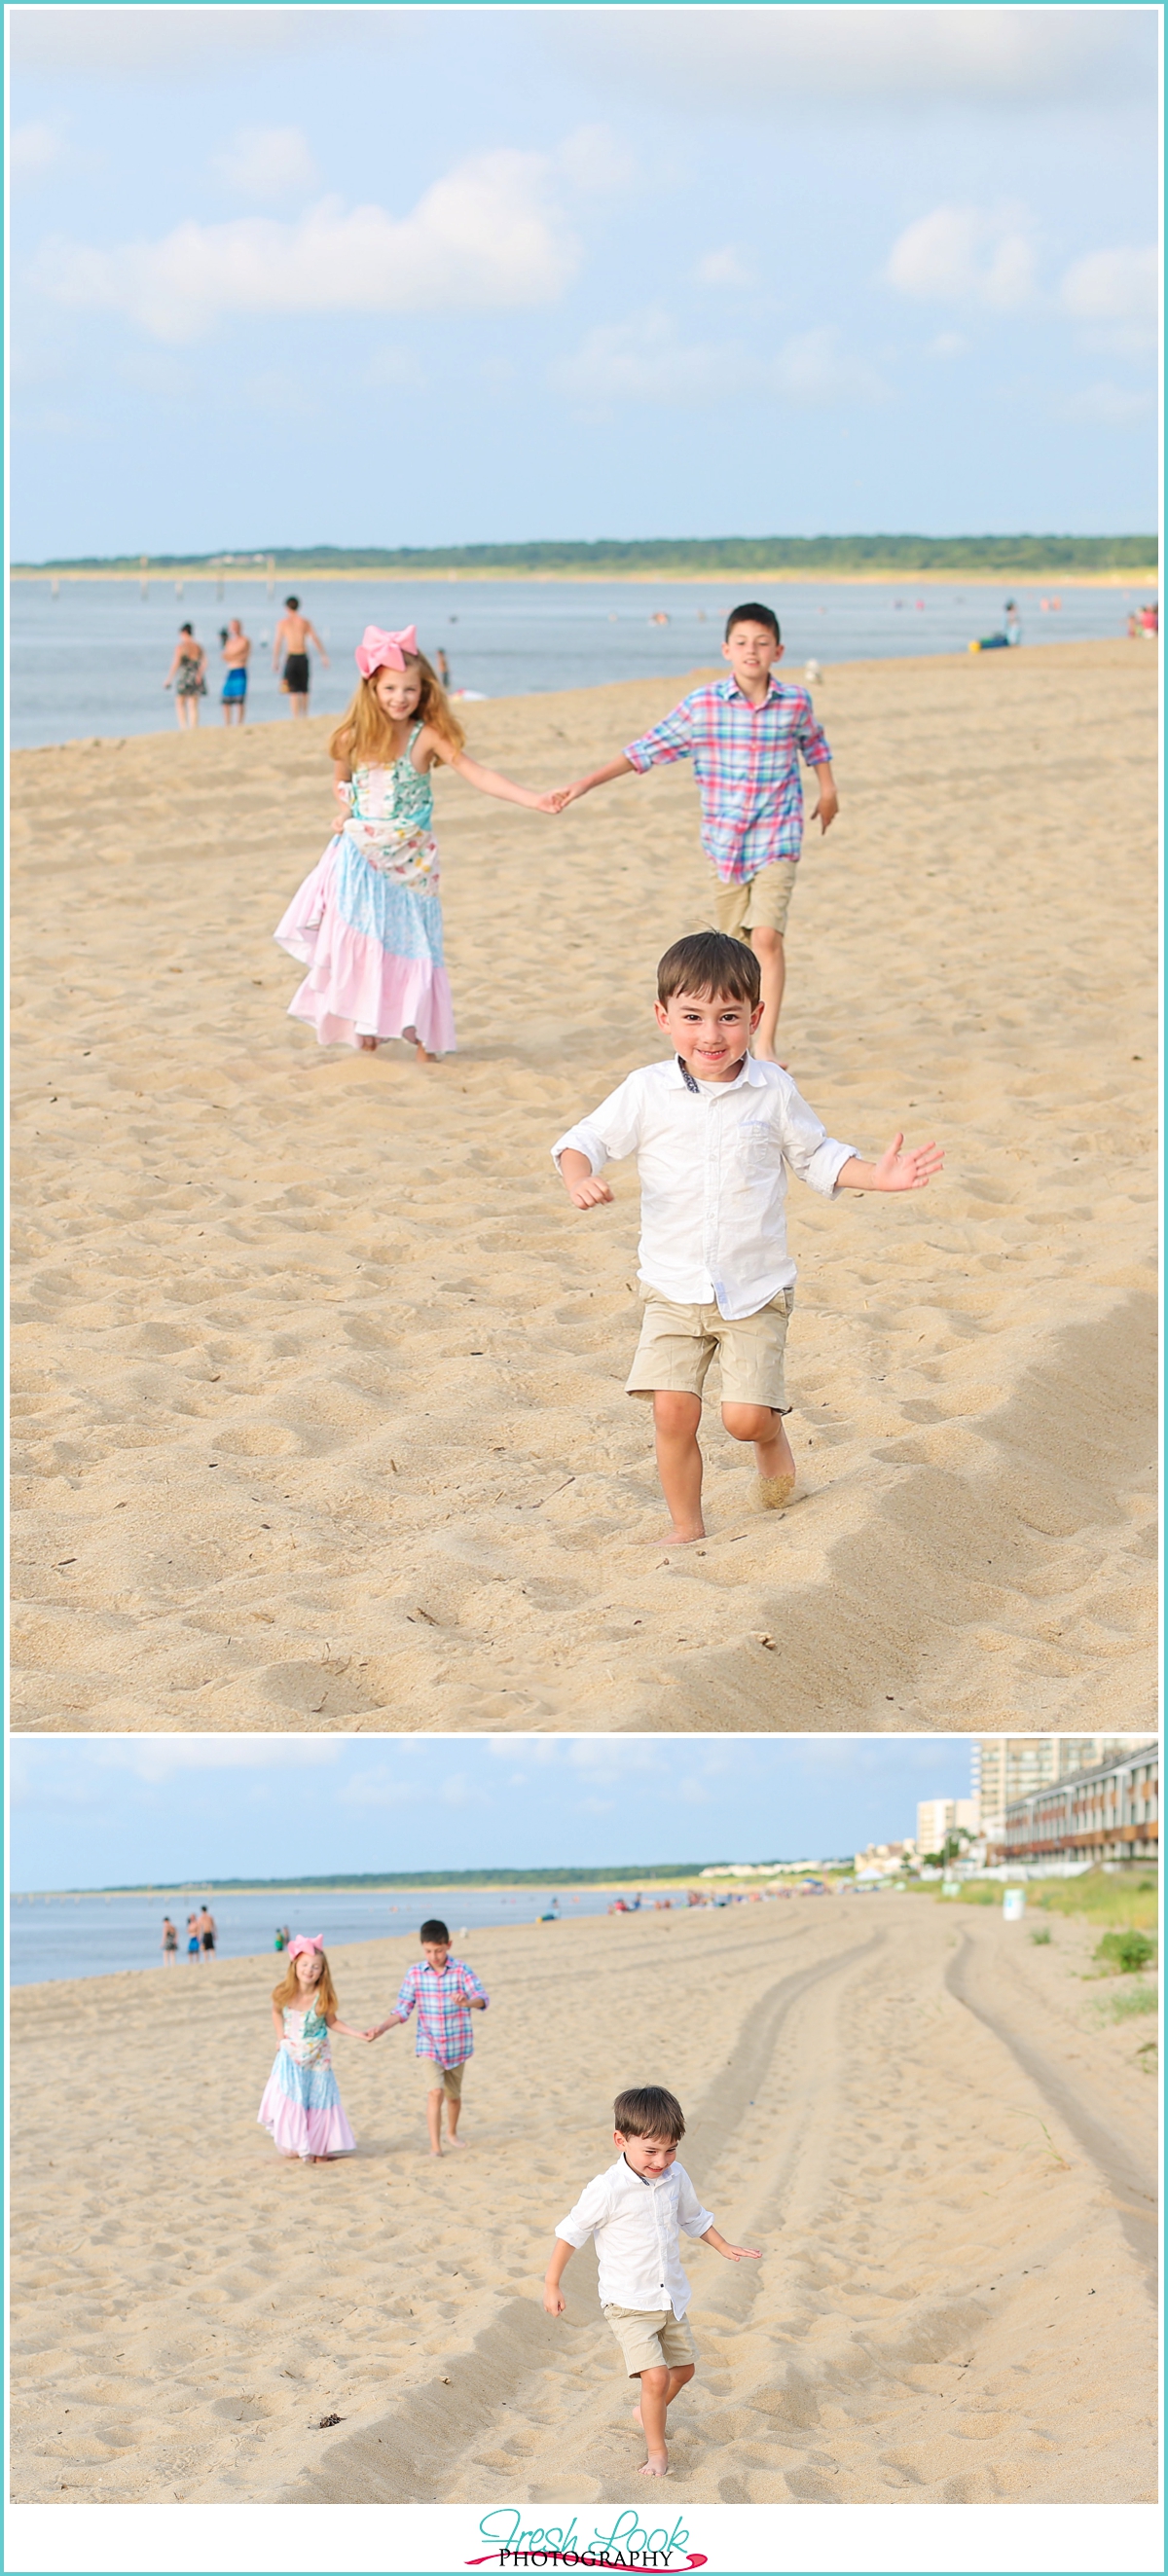 kids playing on the beach